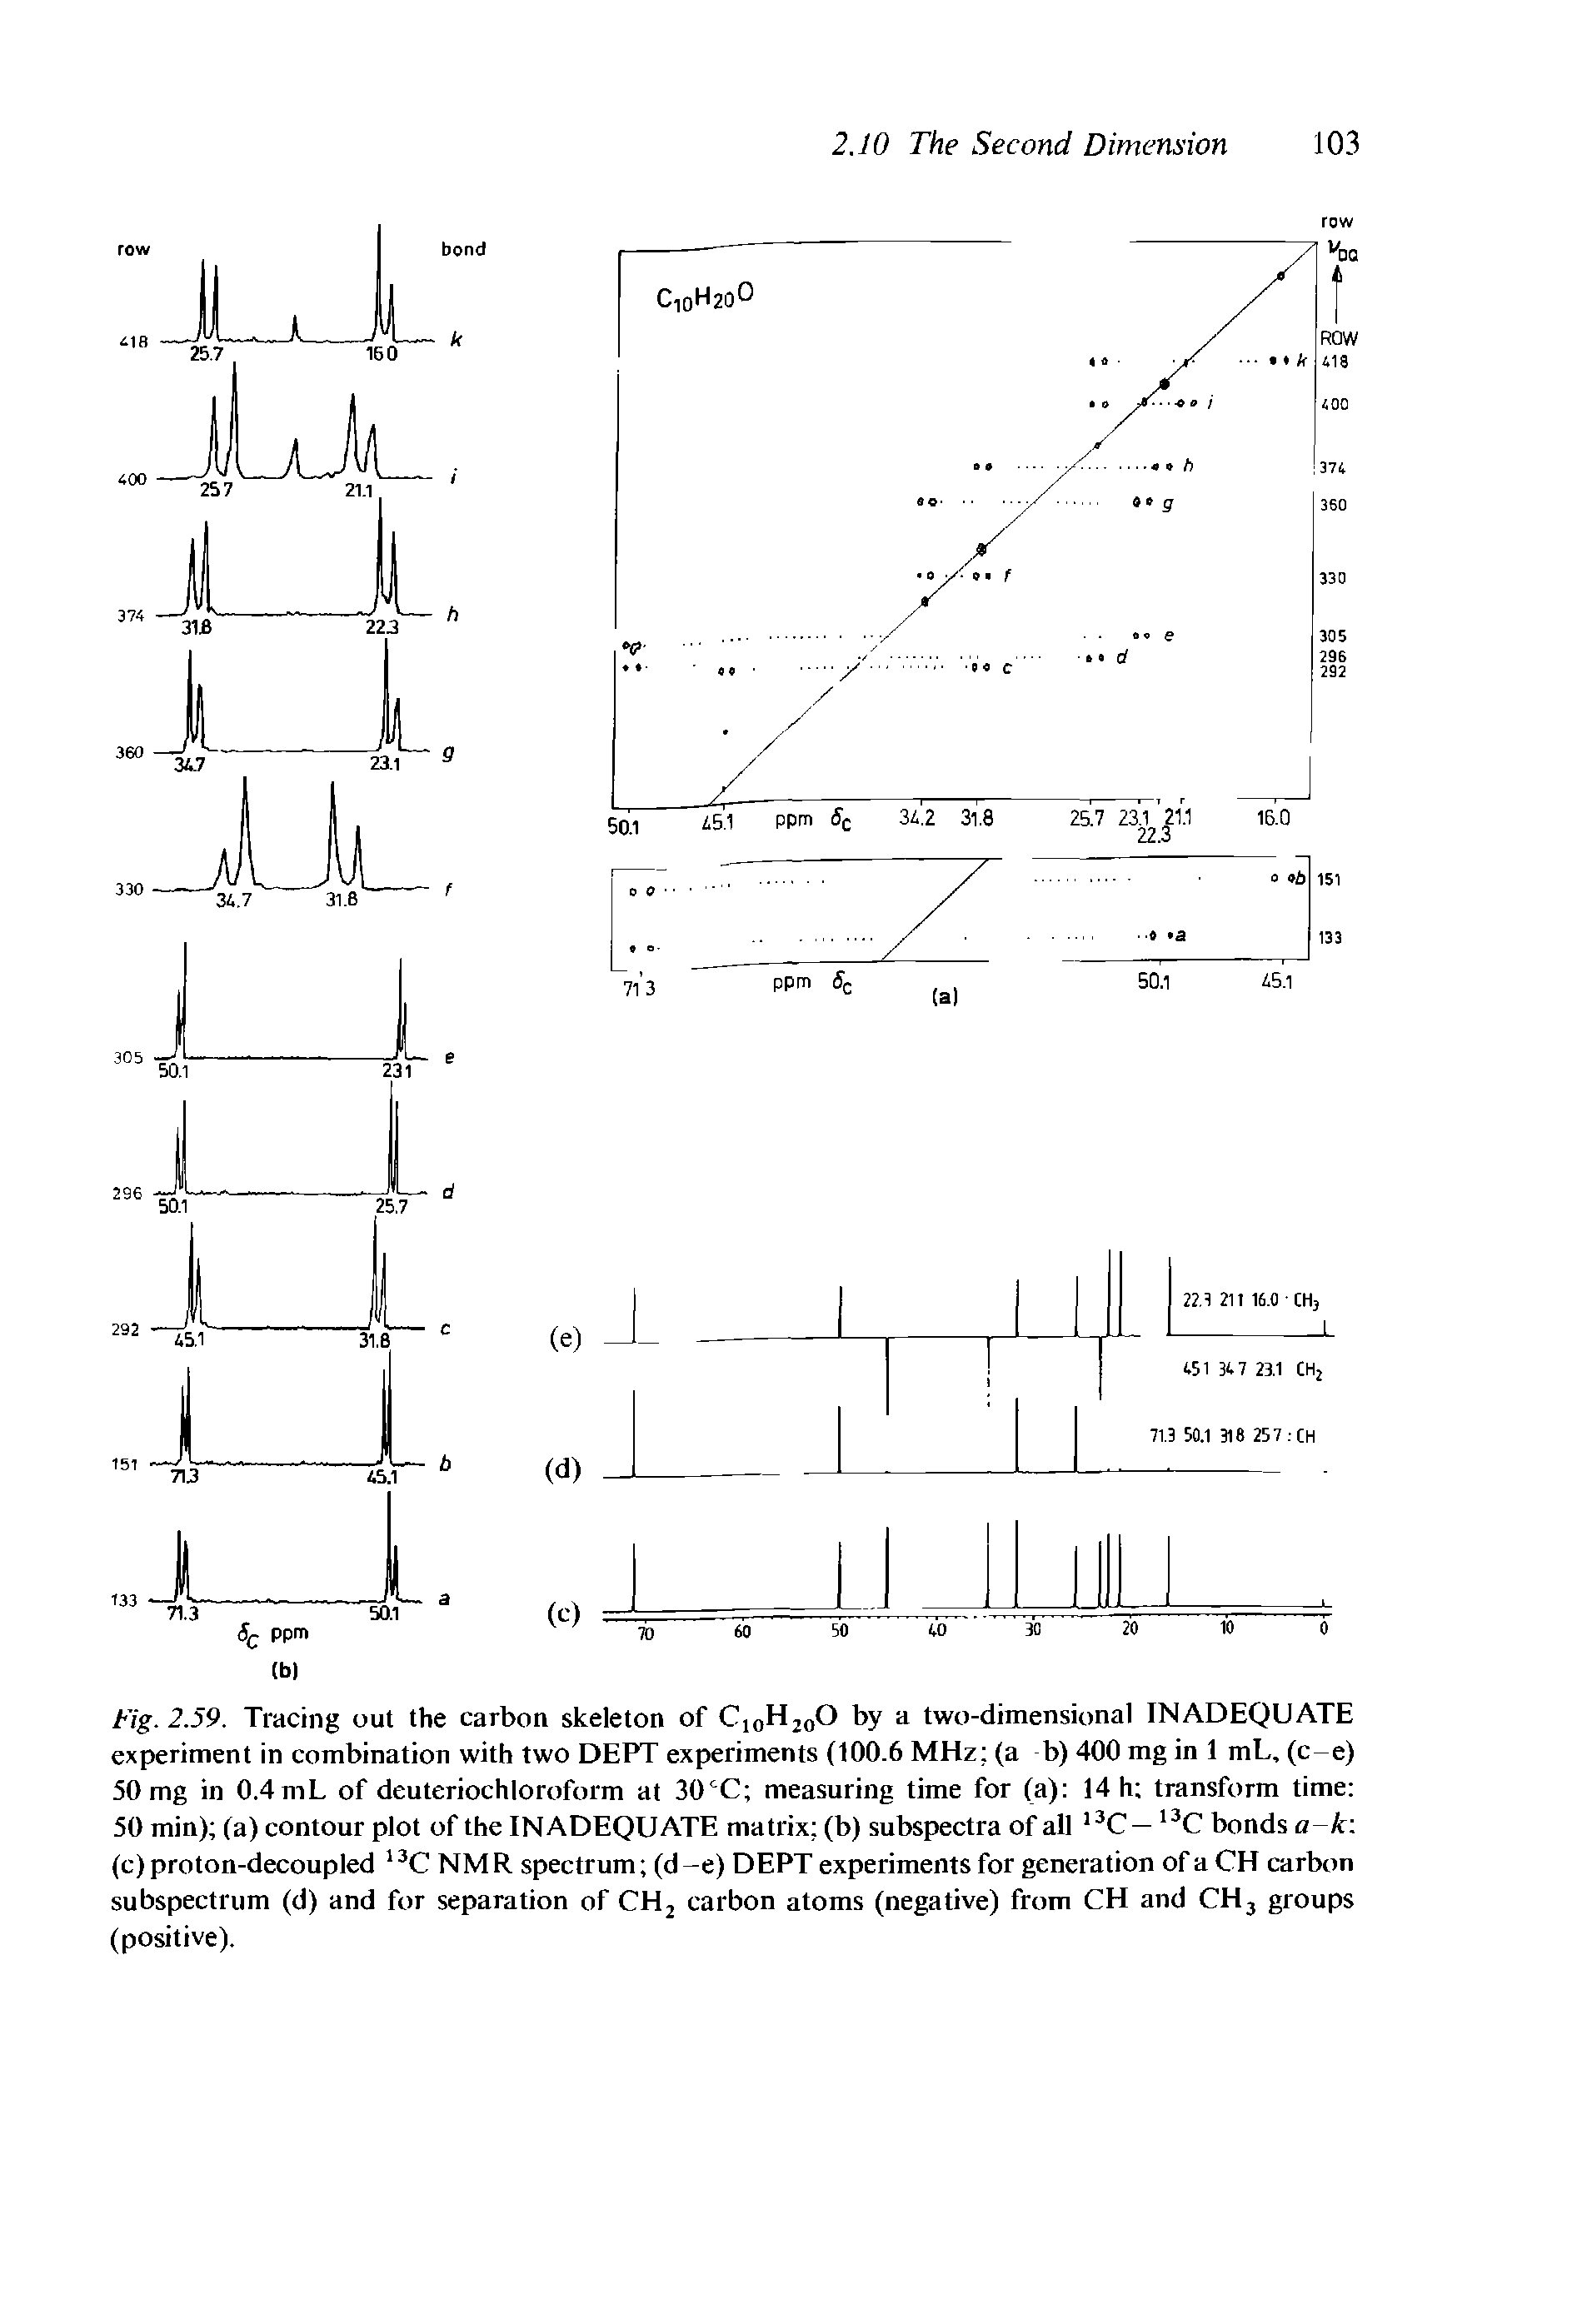 Fig. 2.59. Tracing out the carbon skeleton of C10H20O by a two-dimensional INADEQUATE experiment in combination with two DEPT experiments (100.6 MHz (a b) 400 mg in 1 mL, (c-e) 50 mg in 0.4 mL of deuteriochloroform at 30CC measuring time for (a) 14 h transform time 50 min) (a) contour plot of the INADEQUATE matrix (b) subspectra of all 13C — 13C bonds u k (c) proton-decoupled 13C NMR spectrum (d -e) DEPT experiments for generation of a CH carbon subspectrum (d) and for separation of CH2 carbon atoms (negative) from CH and CH3 groups (positive).